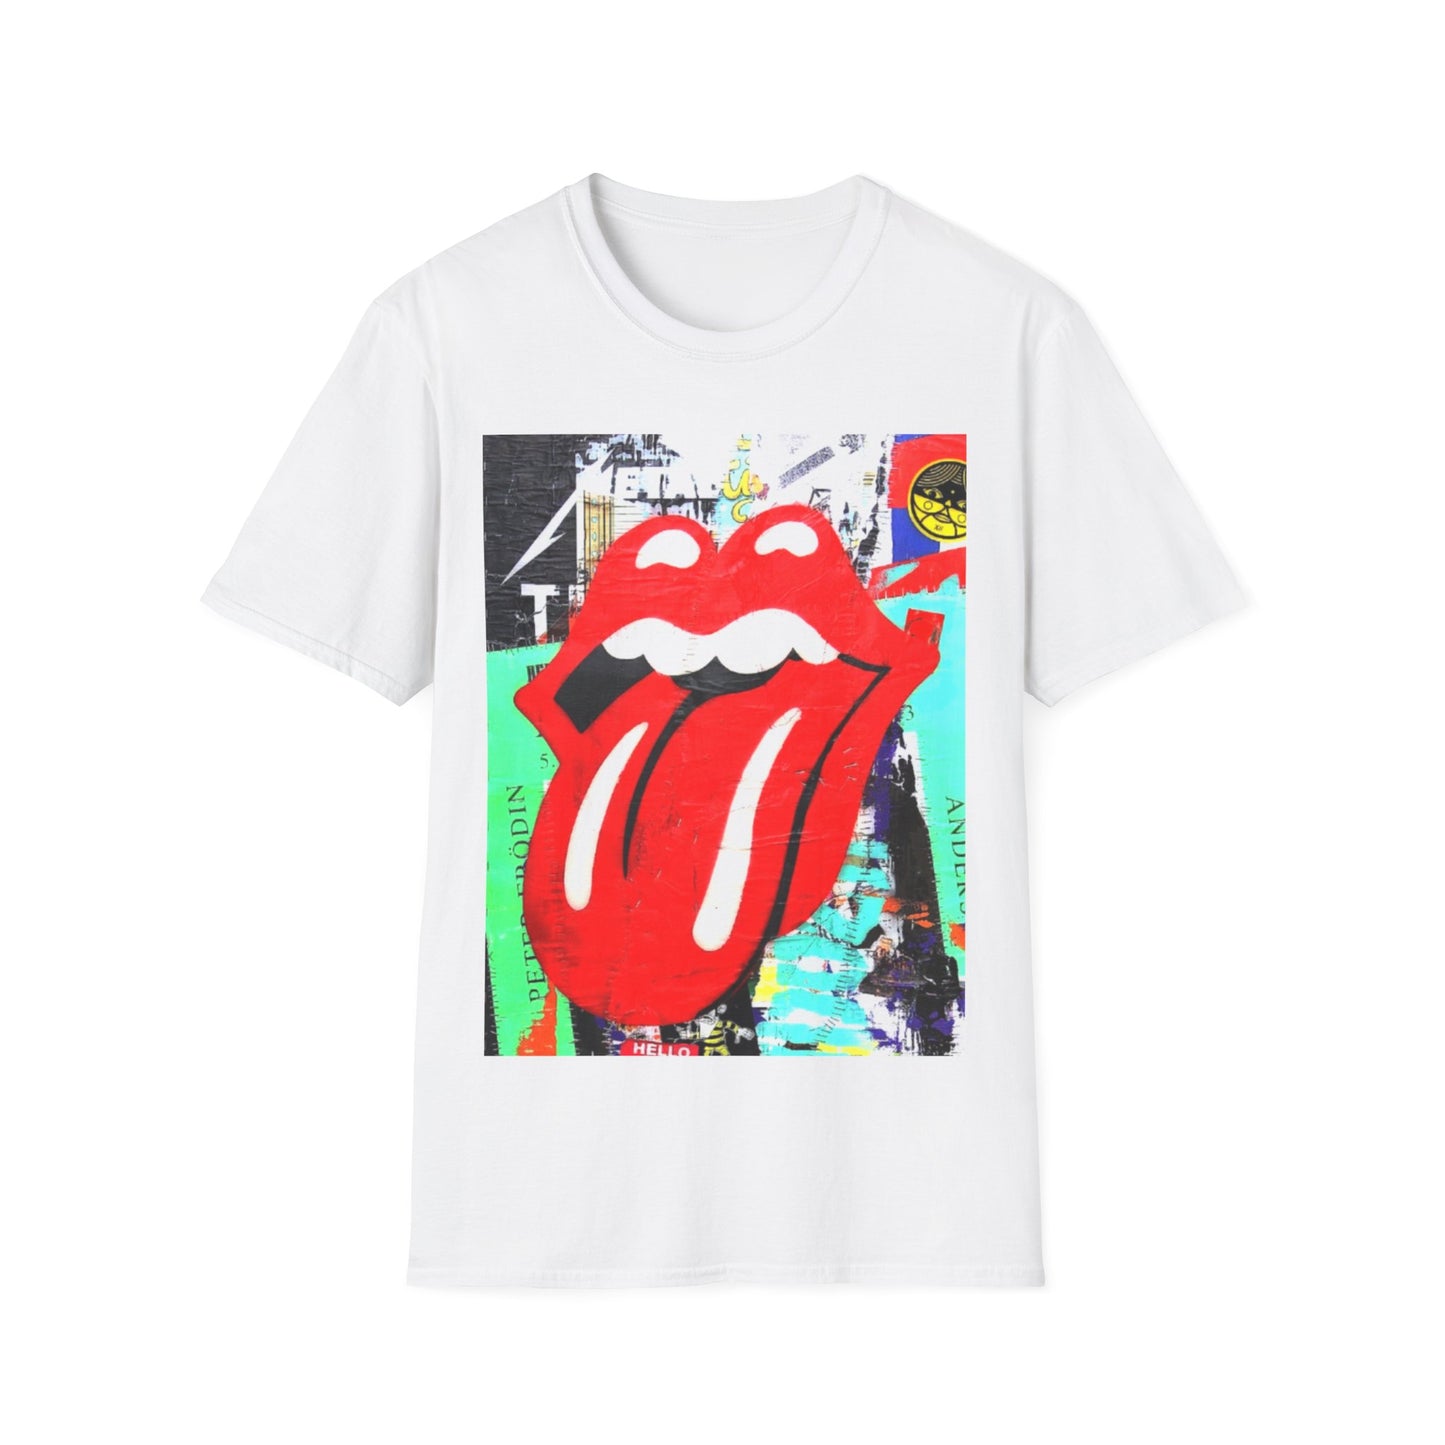 BIG MOUTH Classic Fit AmplifyDestroy Print Tee Shirt Rolling Stones Men Women Black White